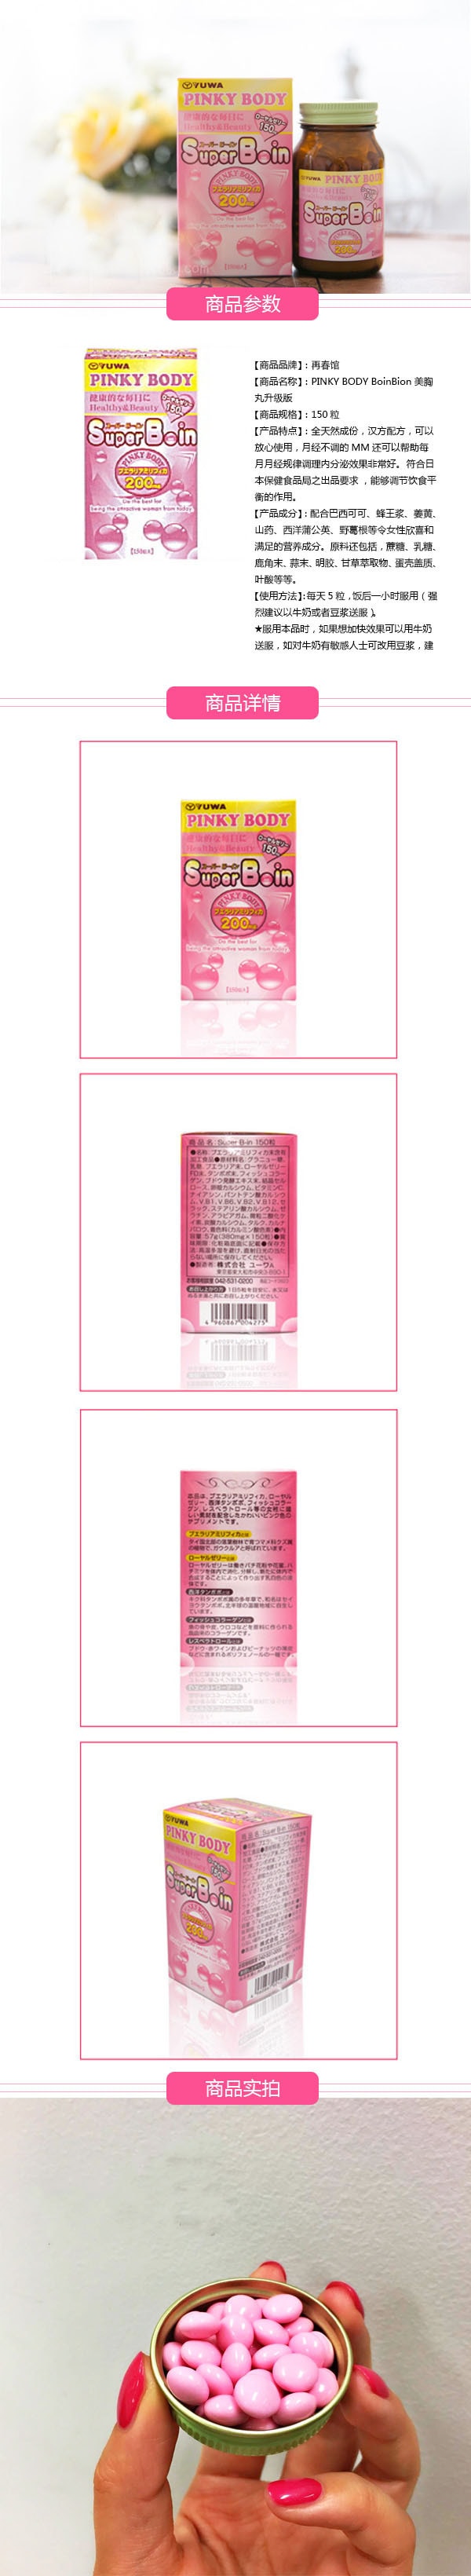 LONG KOW Pinky Body Super Boin 150 Tablets